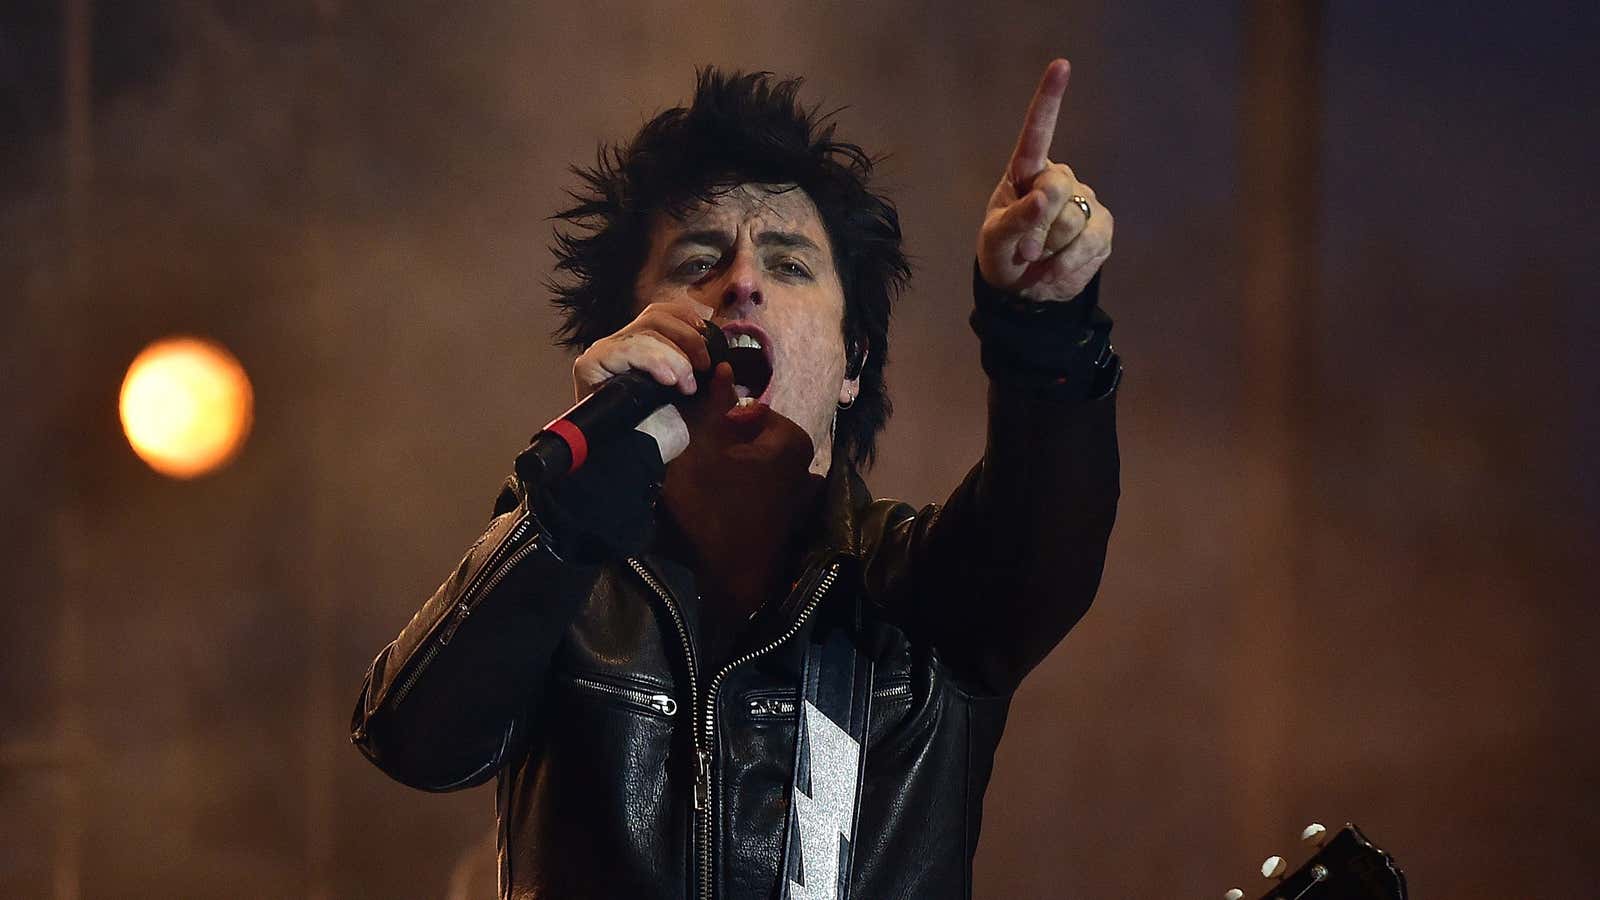 Green Day lead singer Billie Joe Armstrong performing in the US.